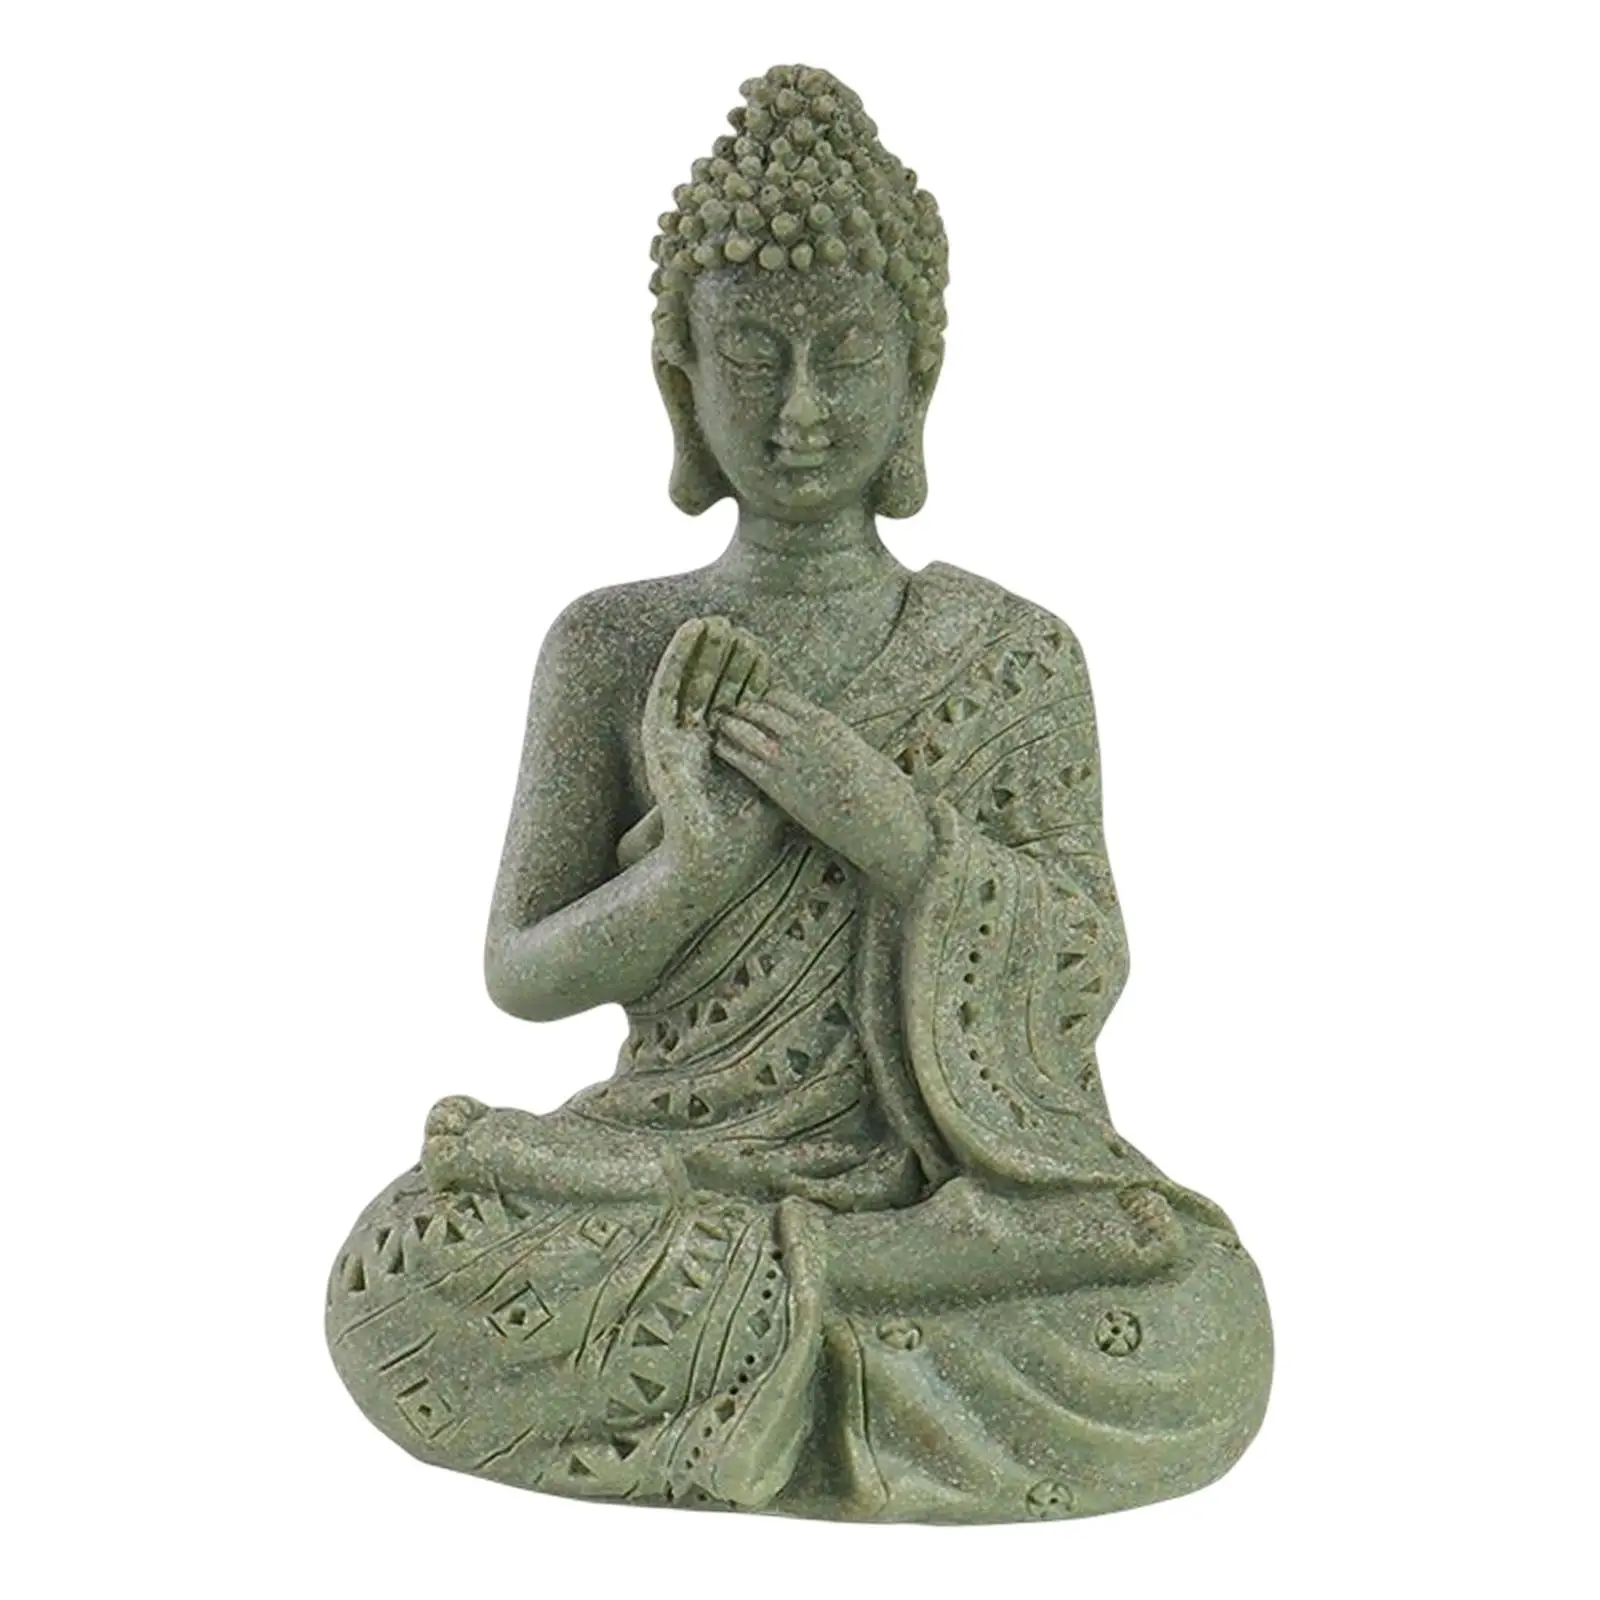 Resin Buddha Statue Buddha Figurine Fengshui Ornament Antique Artwork Buddha Sculpture for Indoor Table Outdoor Decor